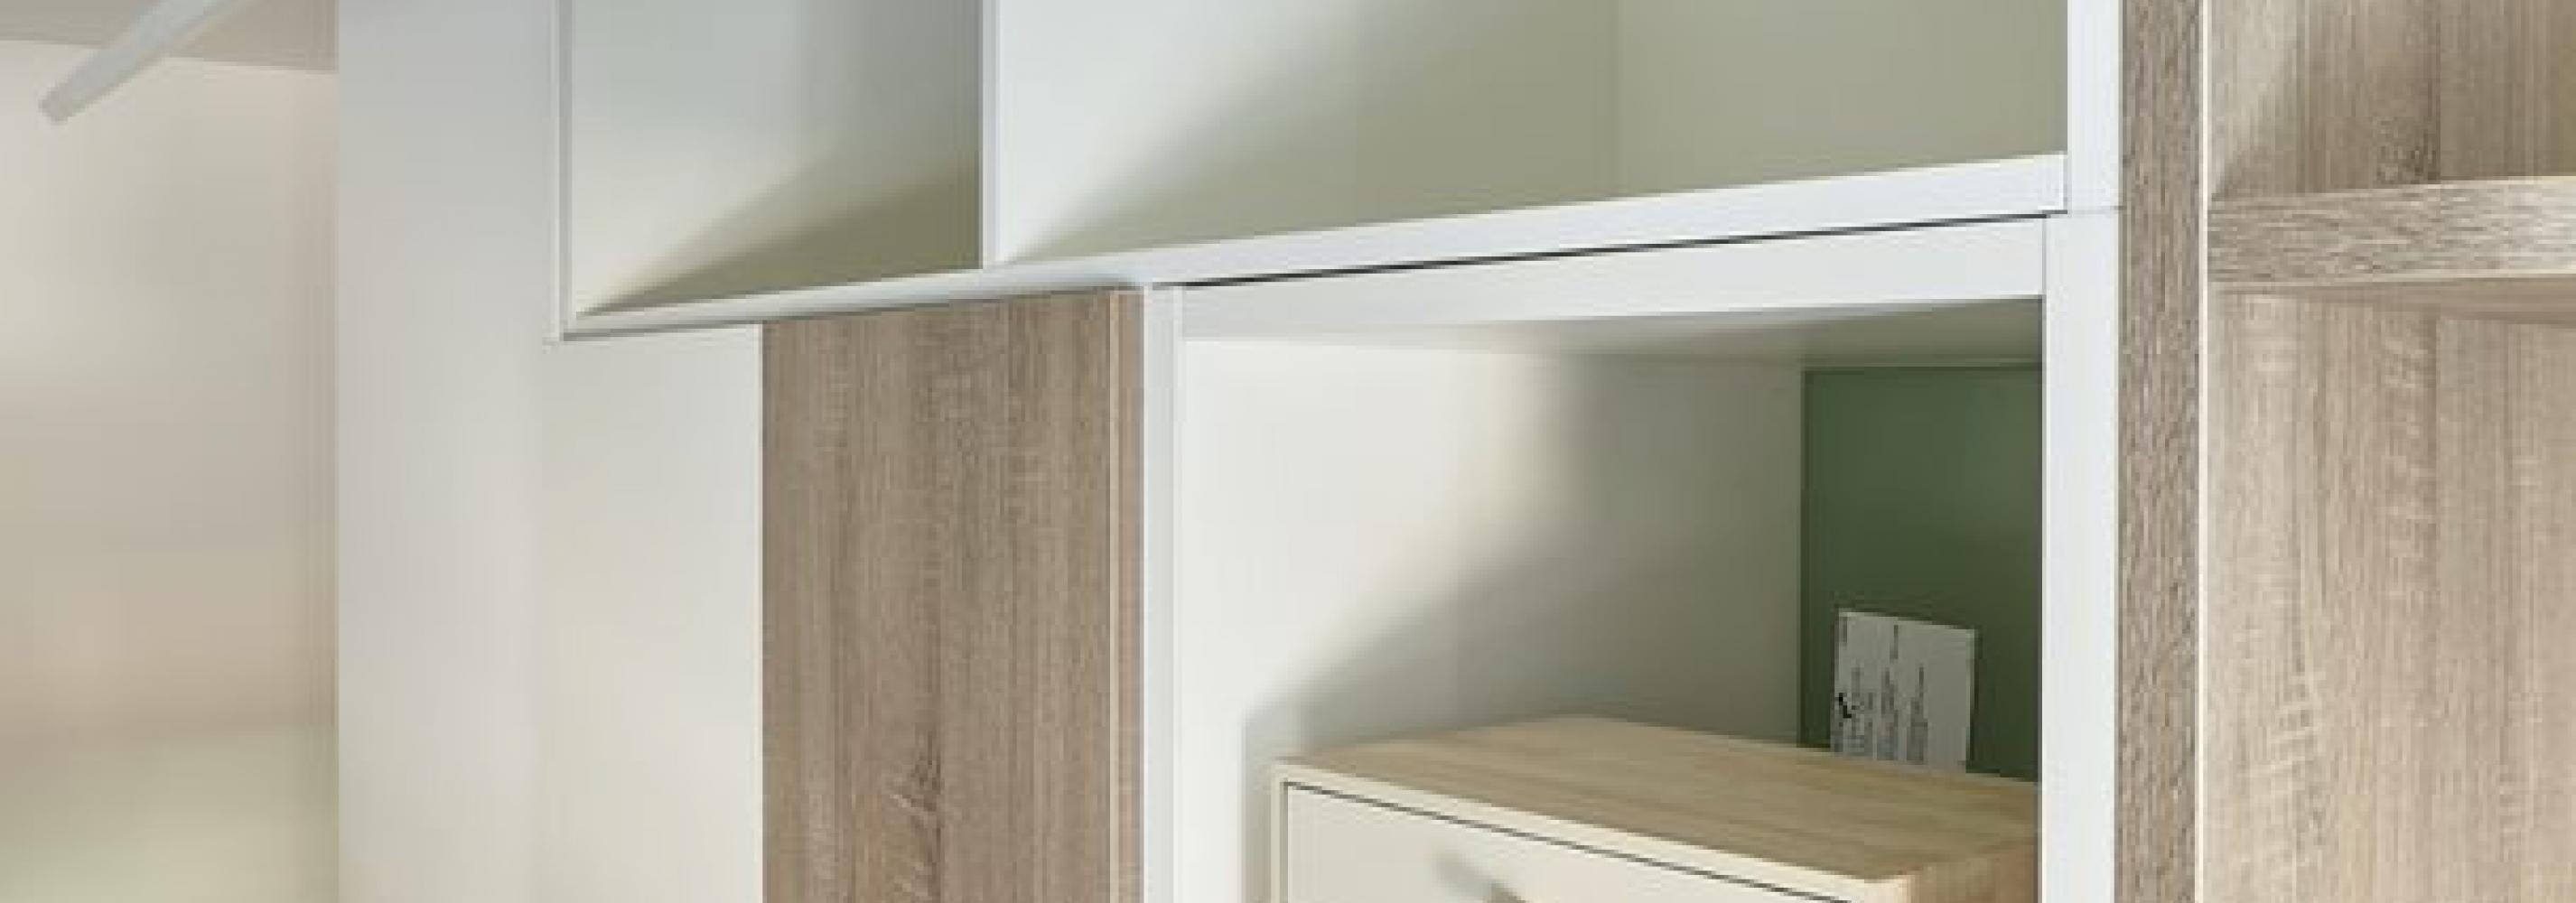 Modern built in storage with wardrove, shelving, drawers and cupboards.